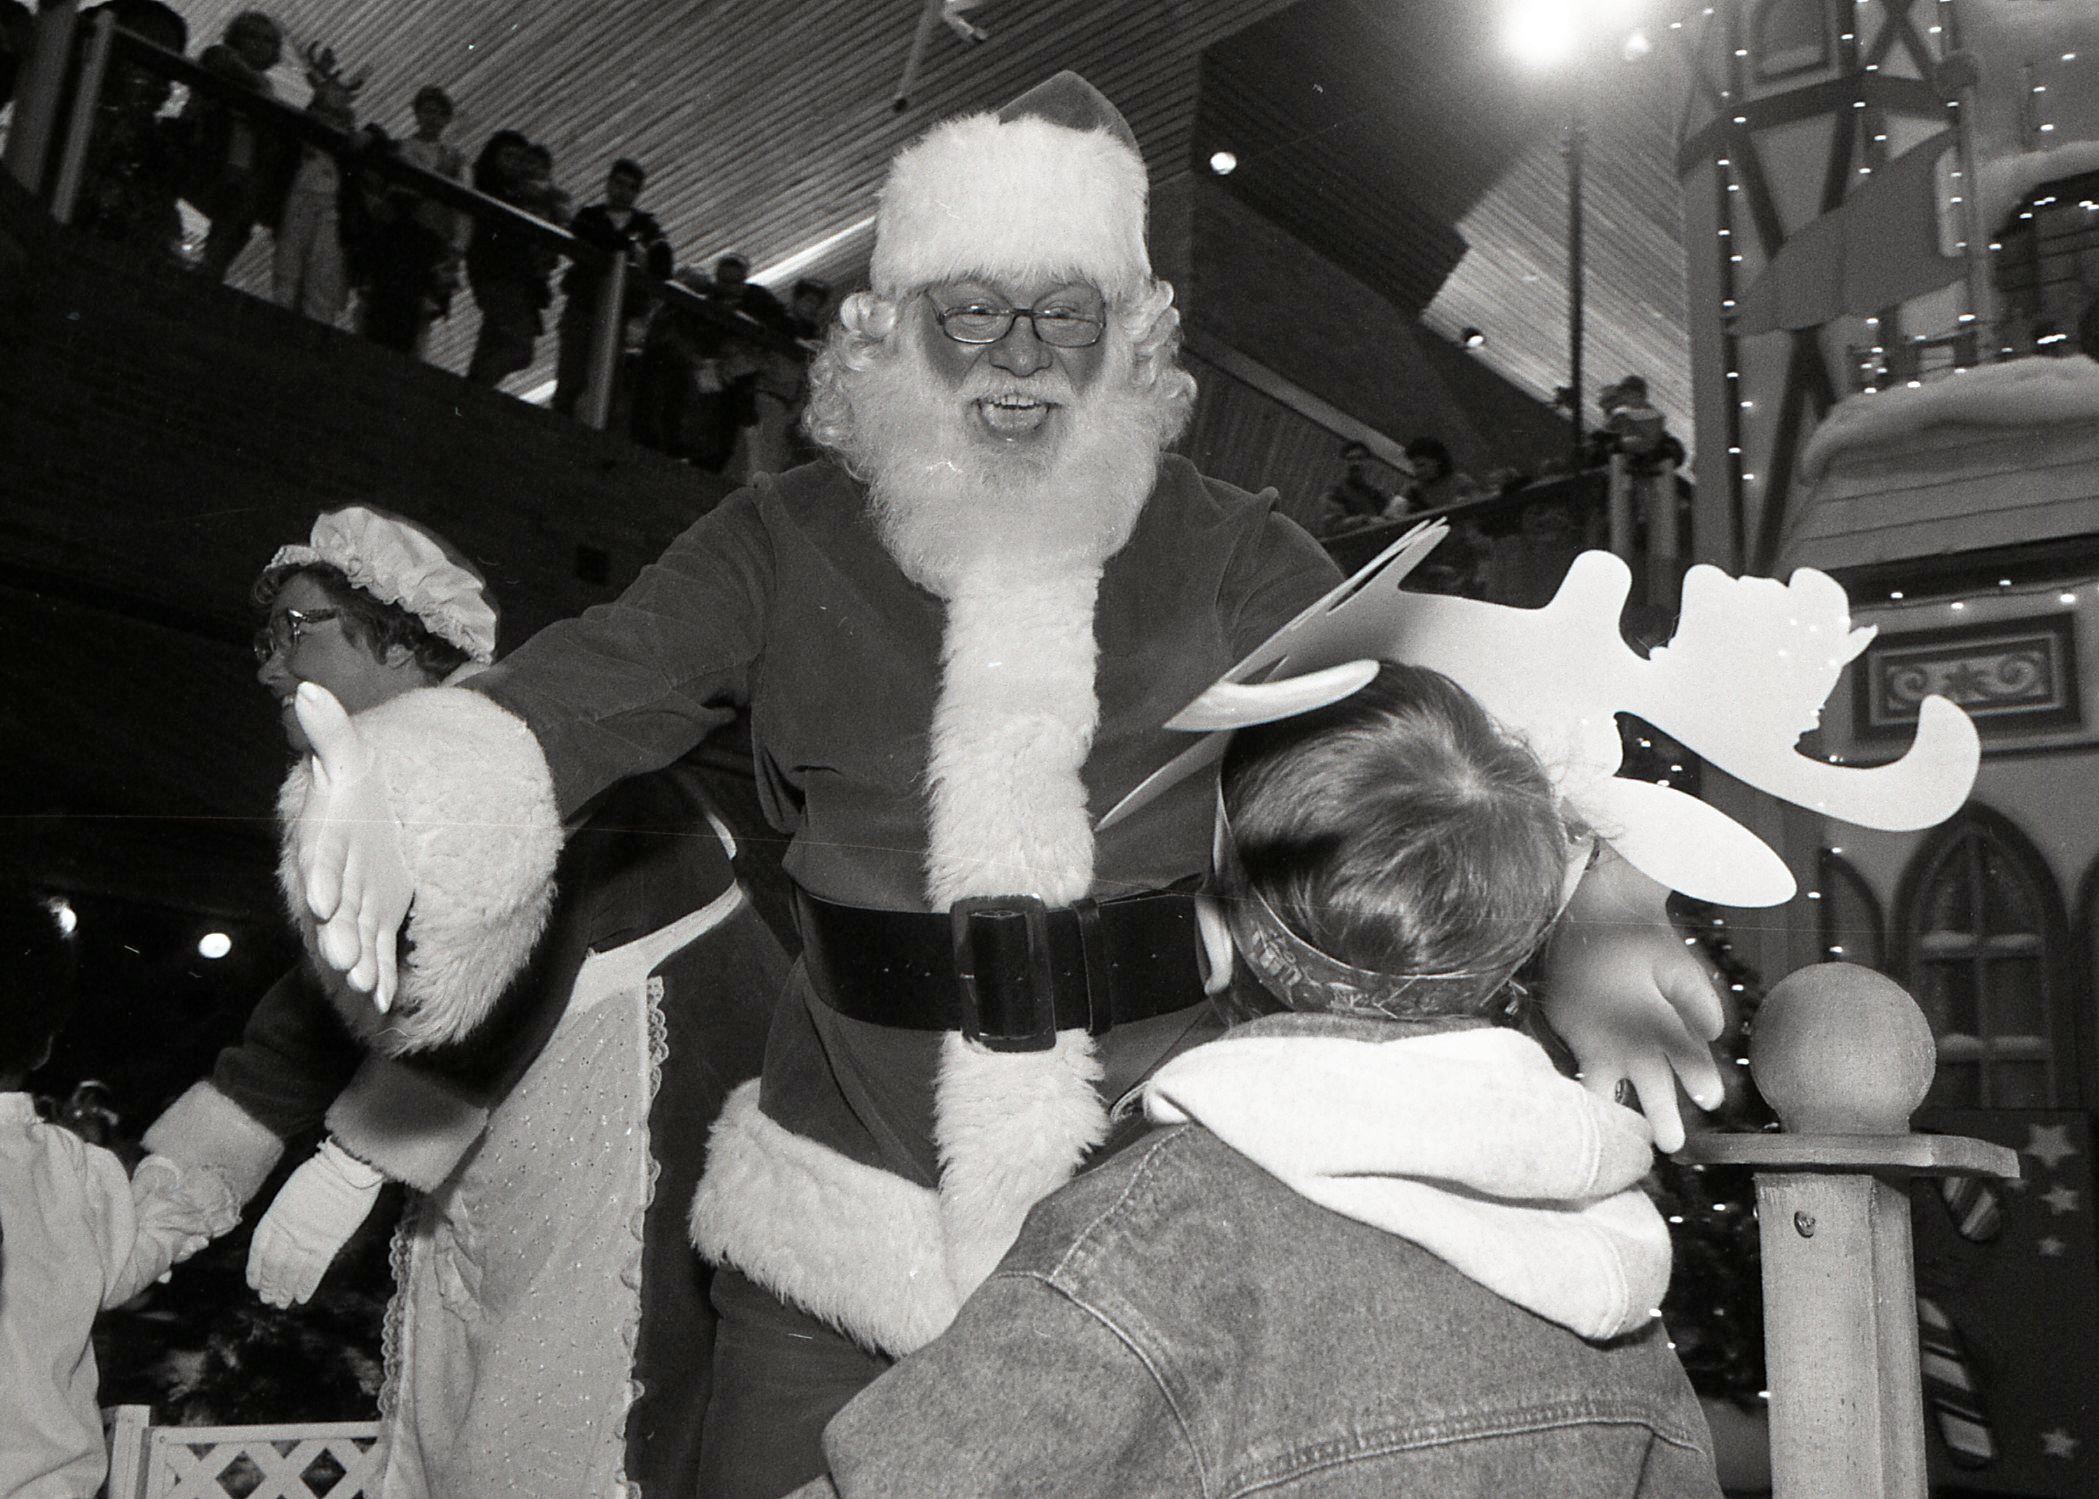 Santa at Coquitlam Centre, 1993 (JPG) Opens in new window